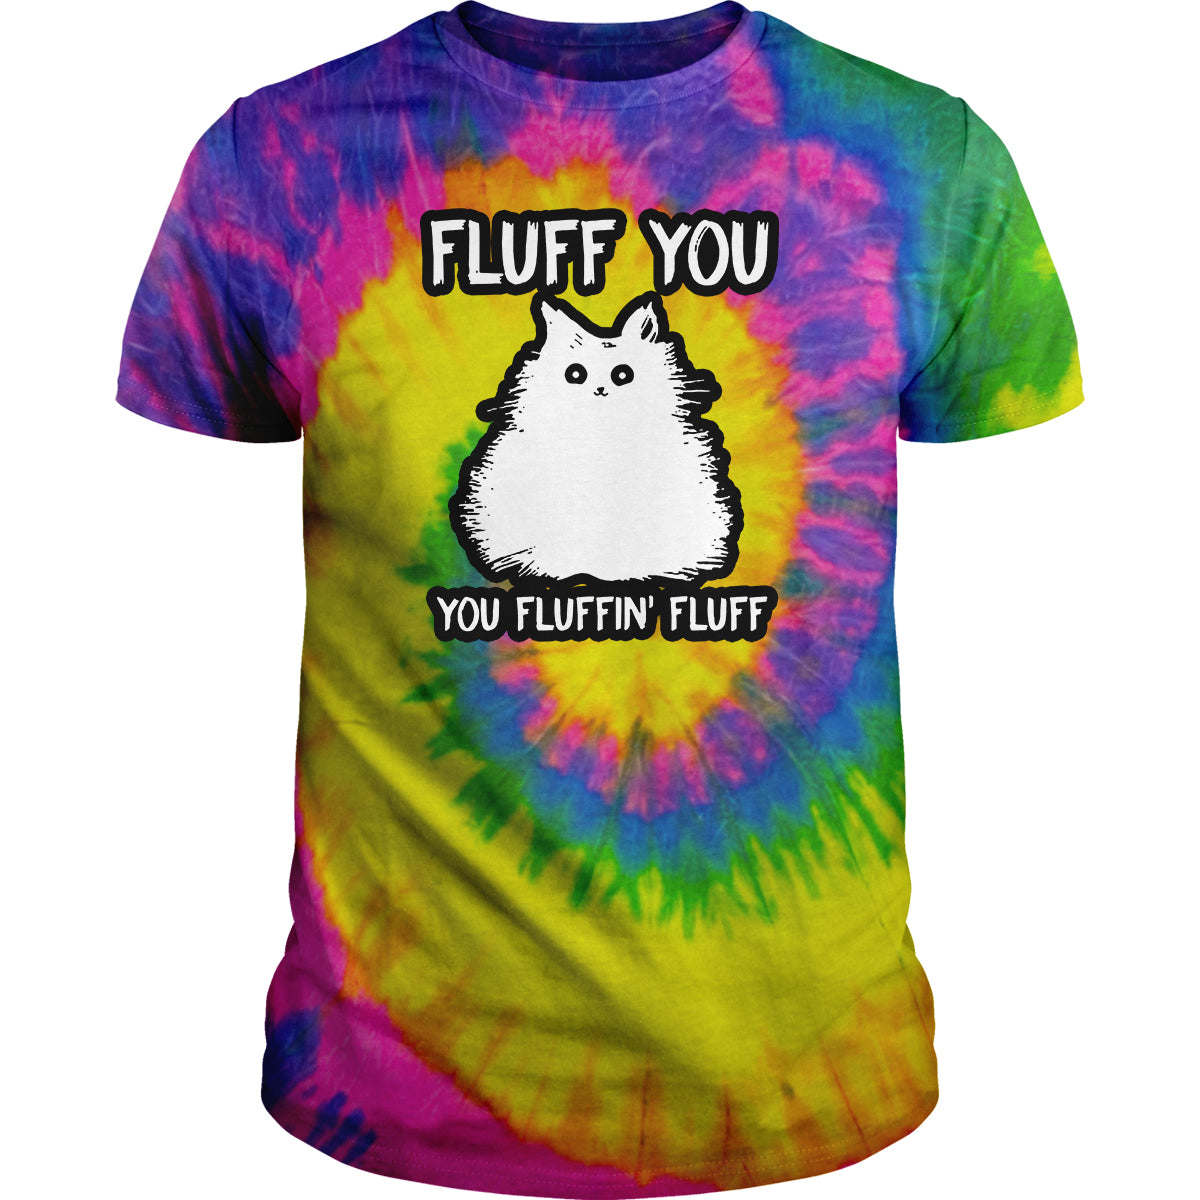 Fluff You You Fluff Tie Dye - BustedTees.com